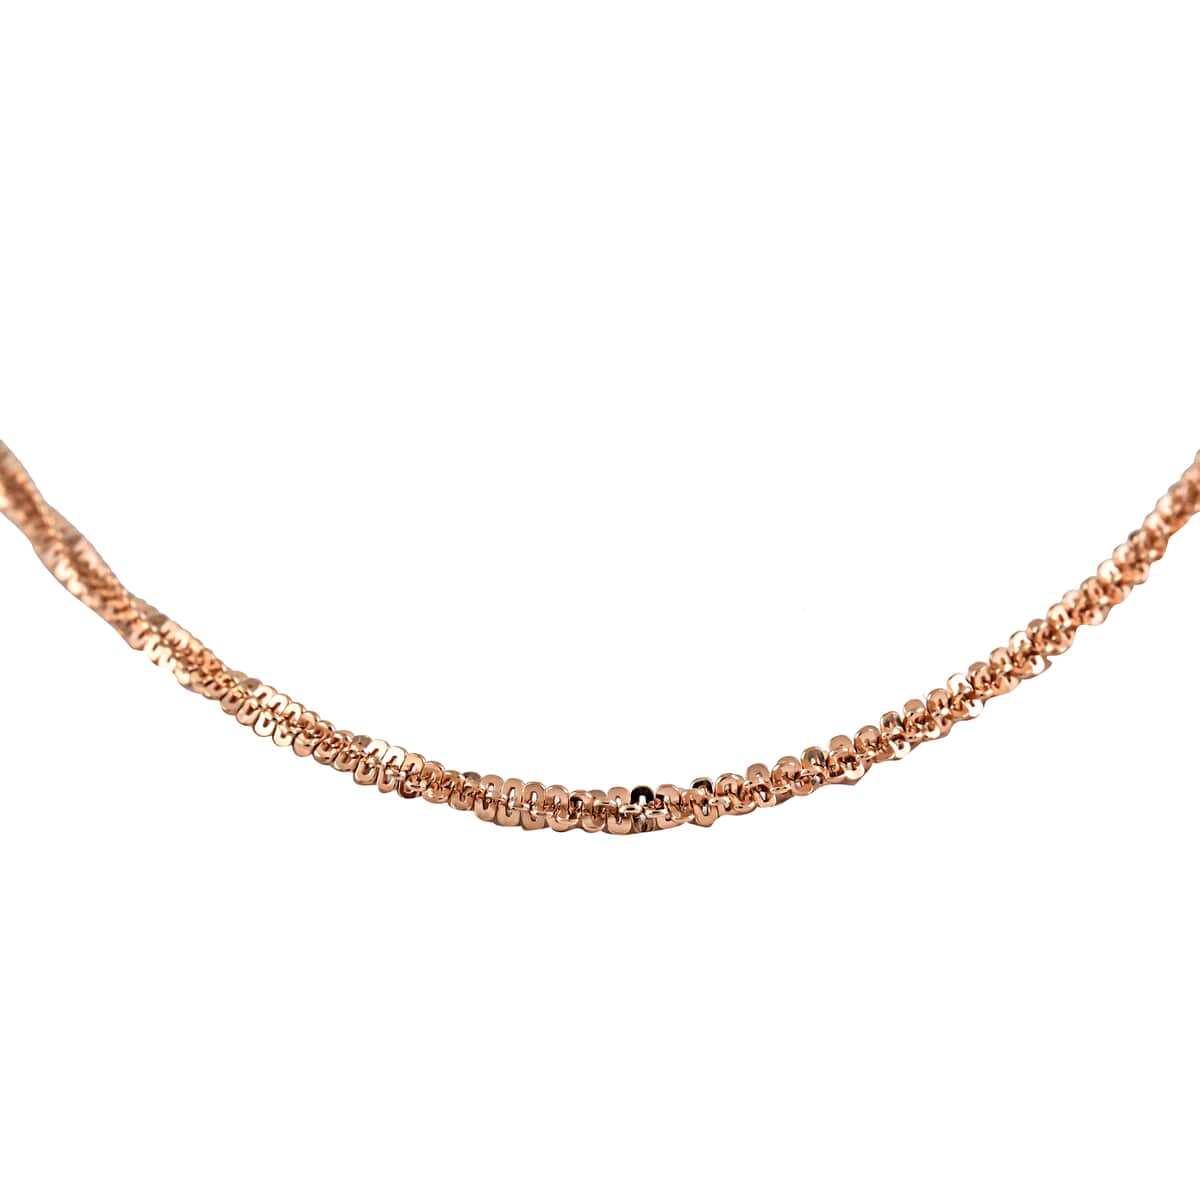 Italian 14K Rose Gold Over Sterling Silver 1.7mm Roc Necklace 30 Inches 5.3 Grams image number 0